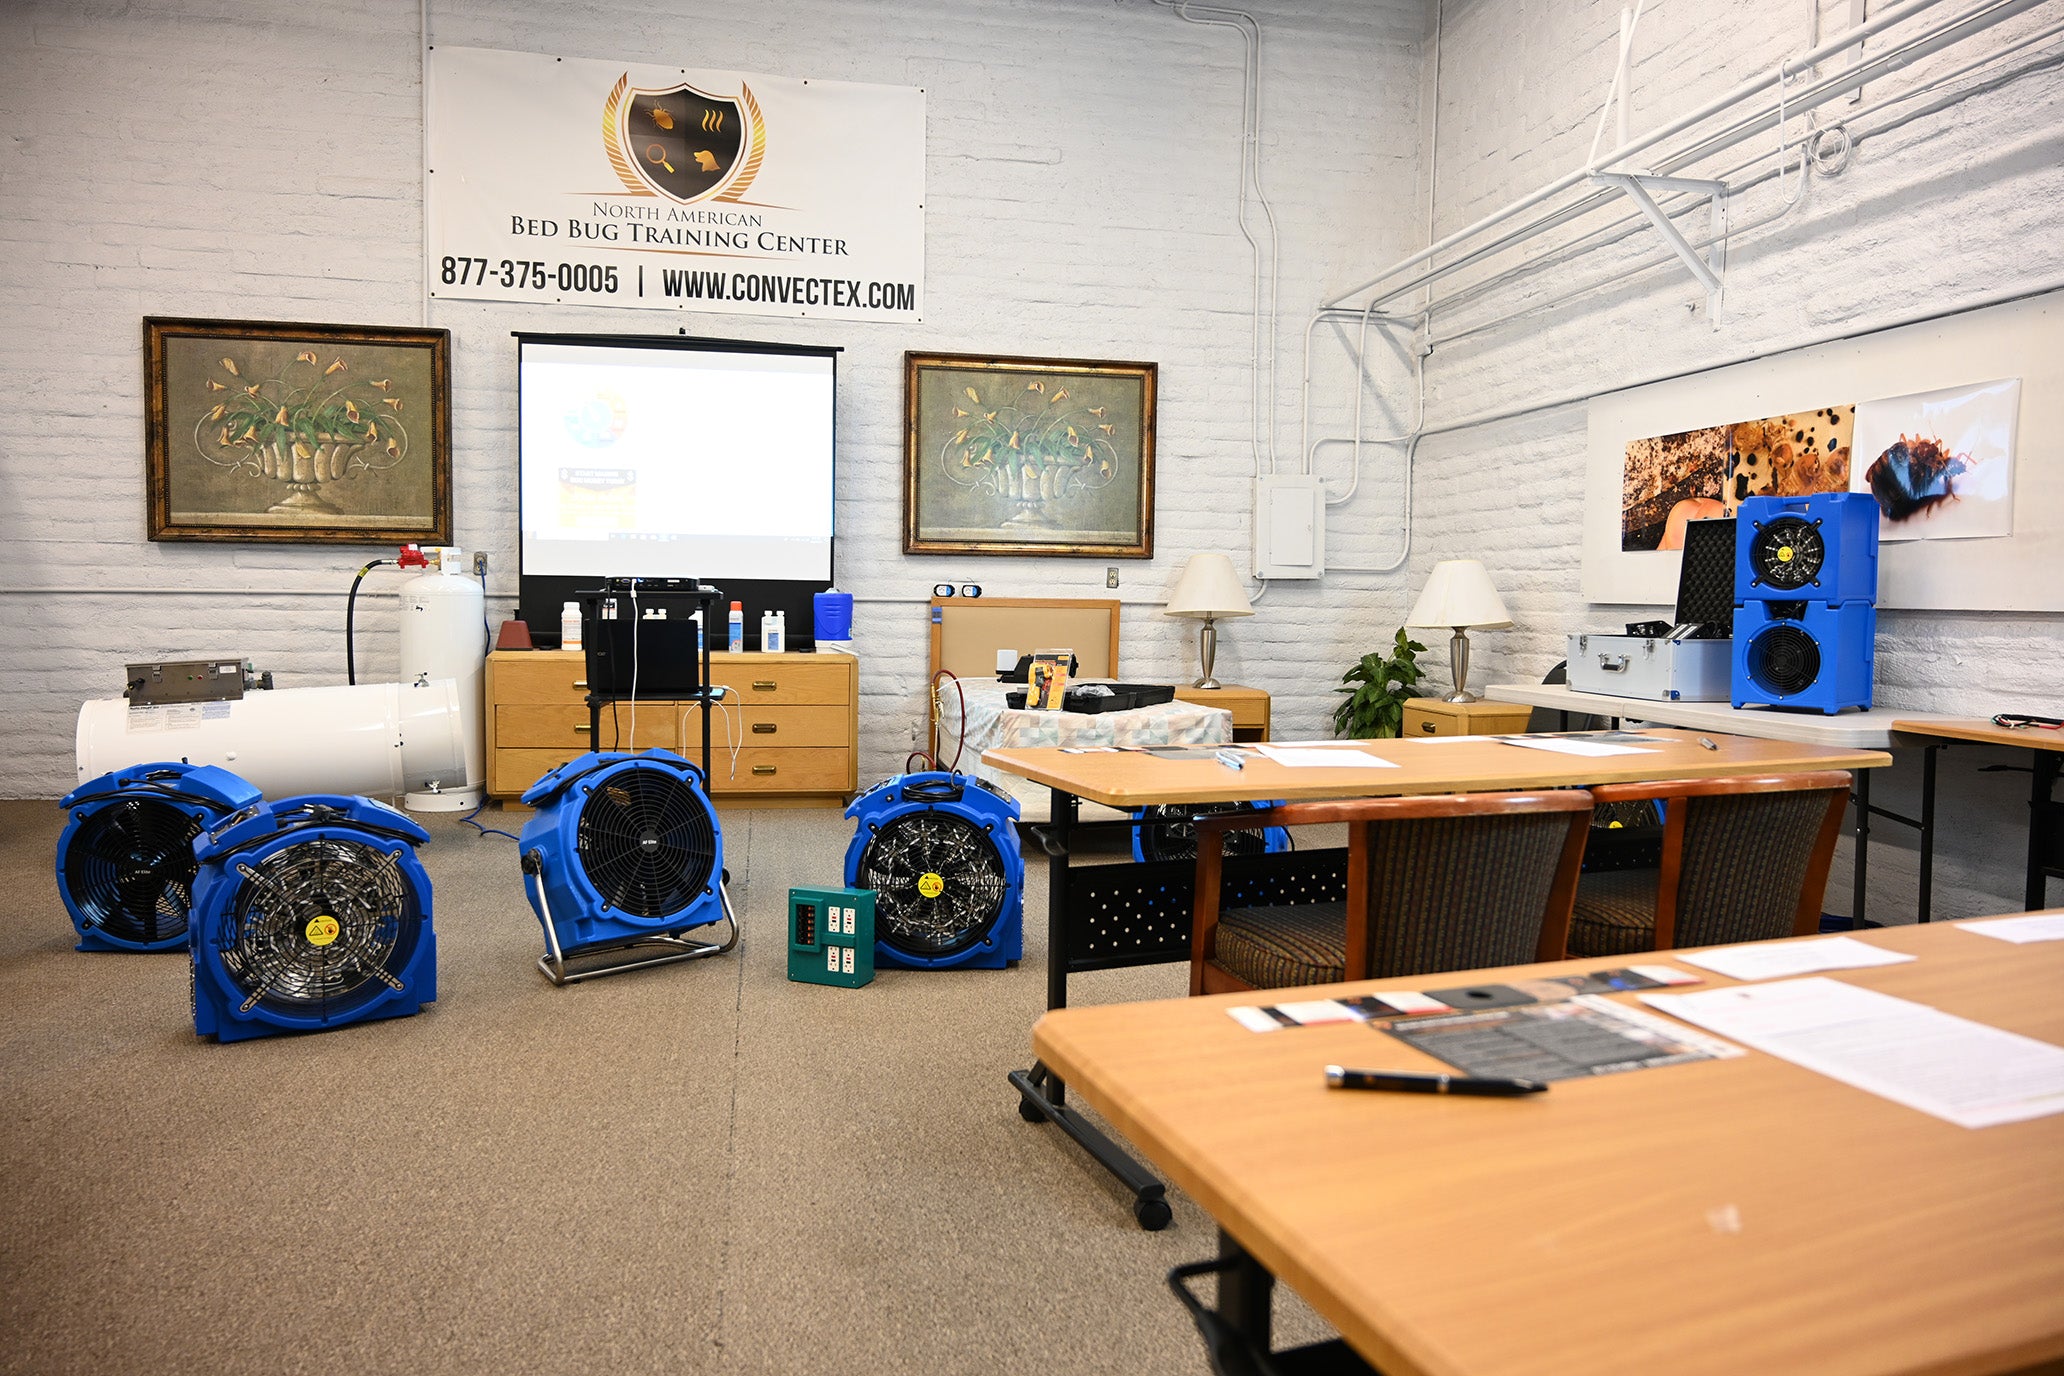 
            
            the north american bed bug training facility with bedbug heaters and training equipment
                  